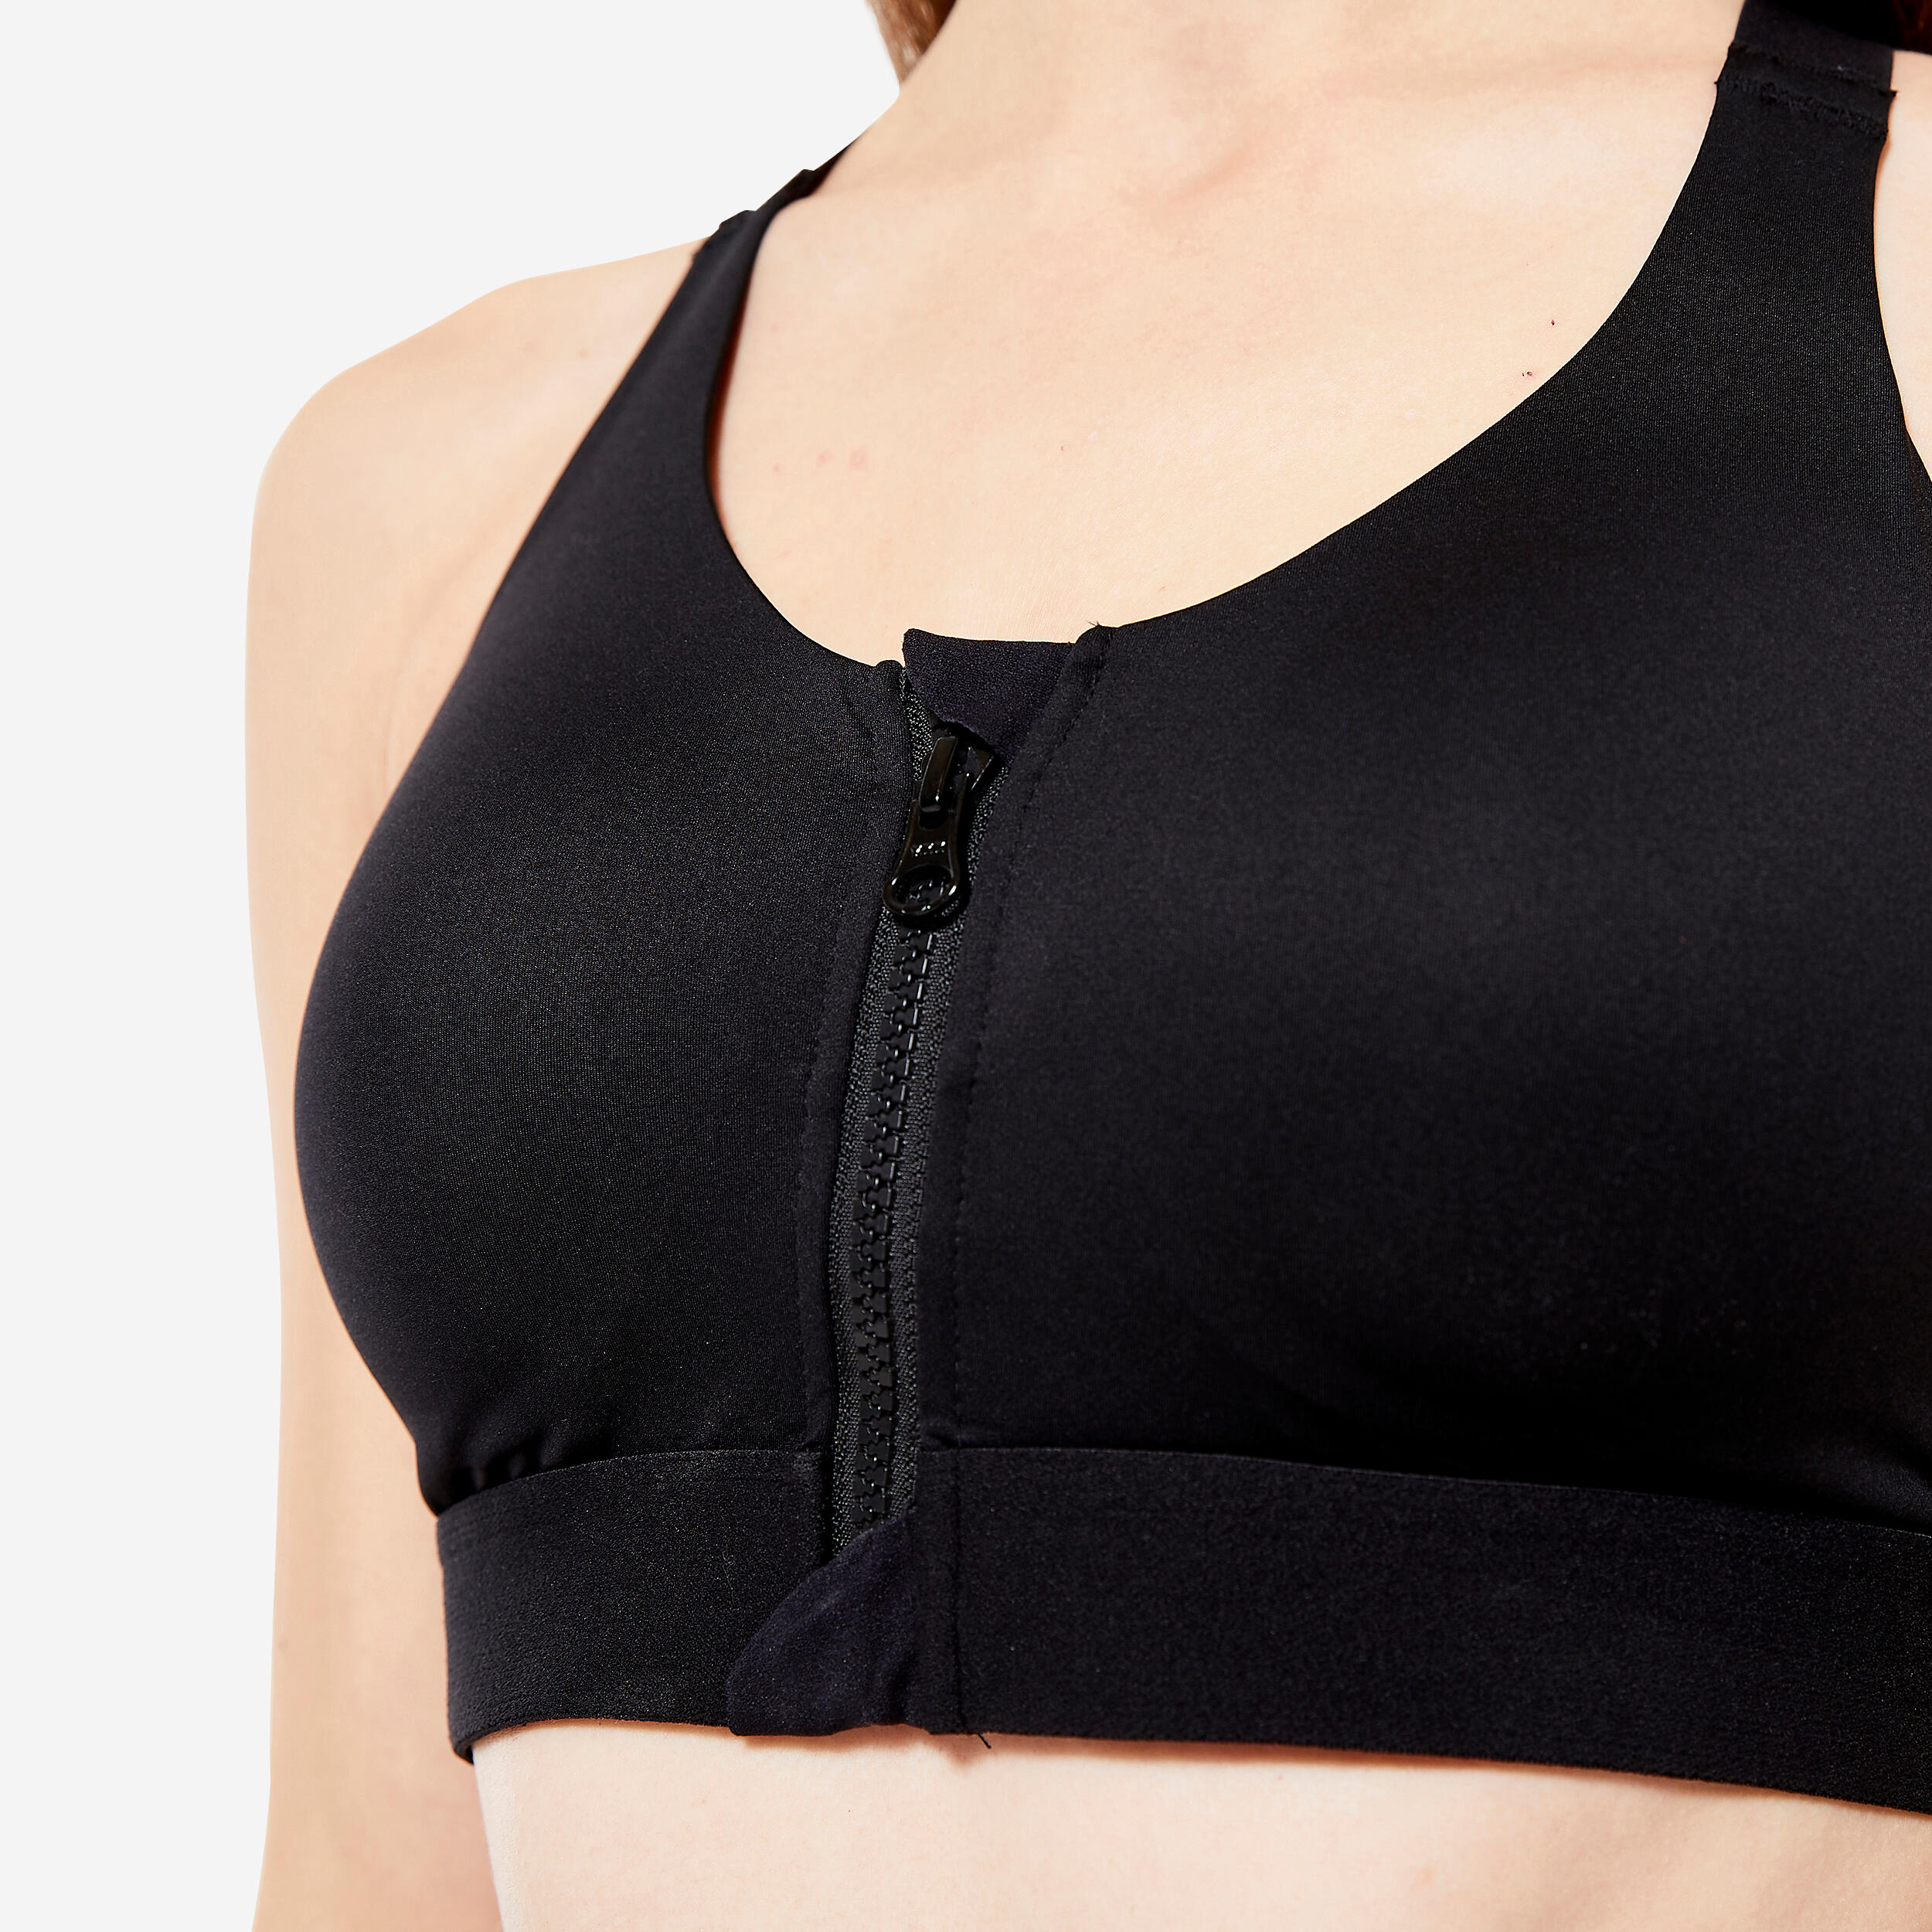 Women's High Support Zipped Sports Bra with Cups - Black 3/6